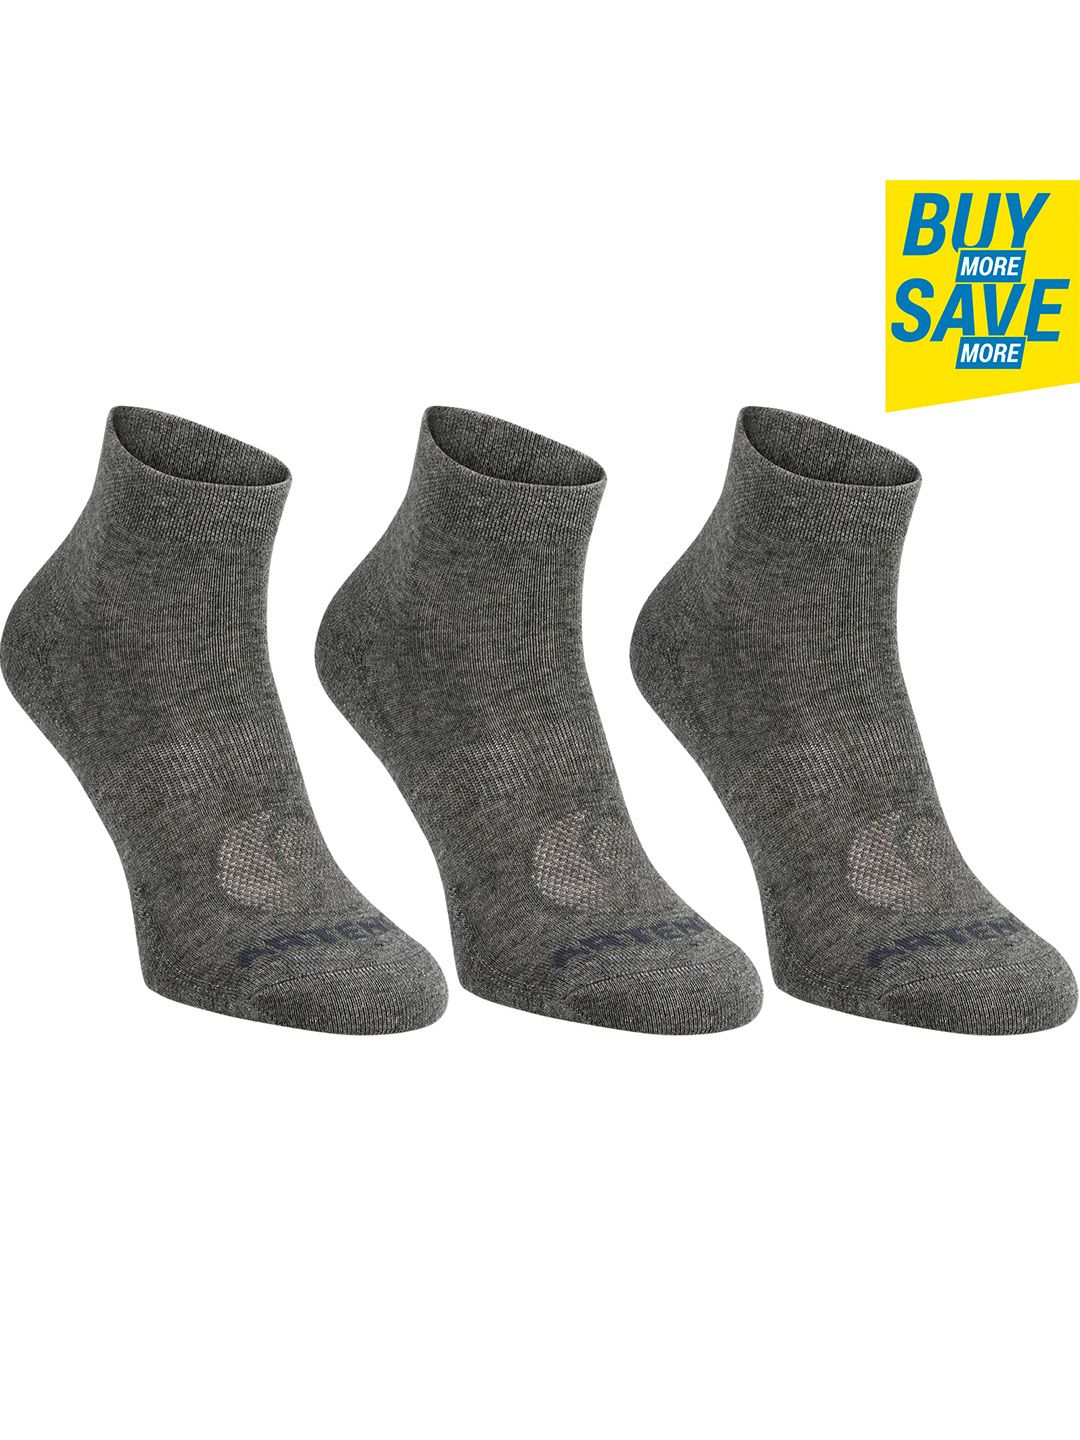 Artengo By Decathlon Unisex Assorted Set Of 3 Patterned Socks Price in India